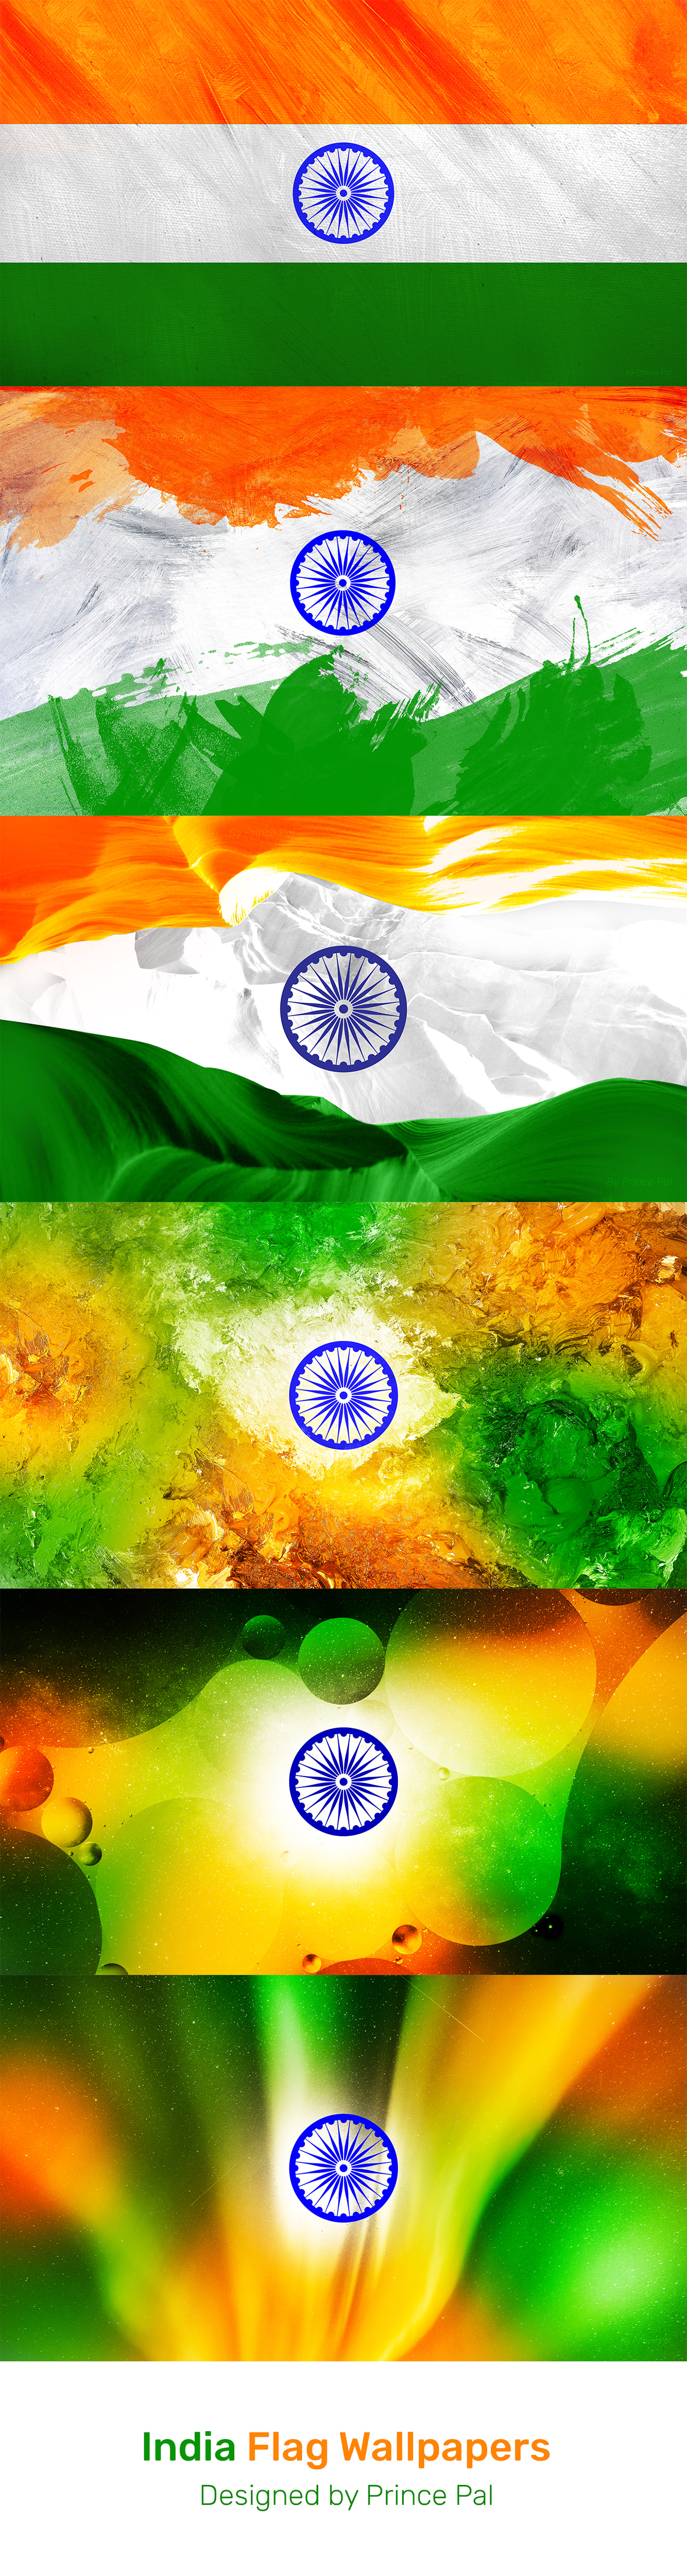 India Flag Wallpapers on Behance